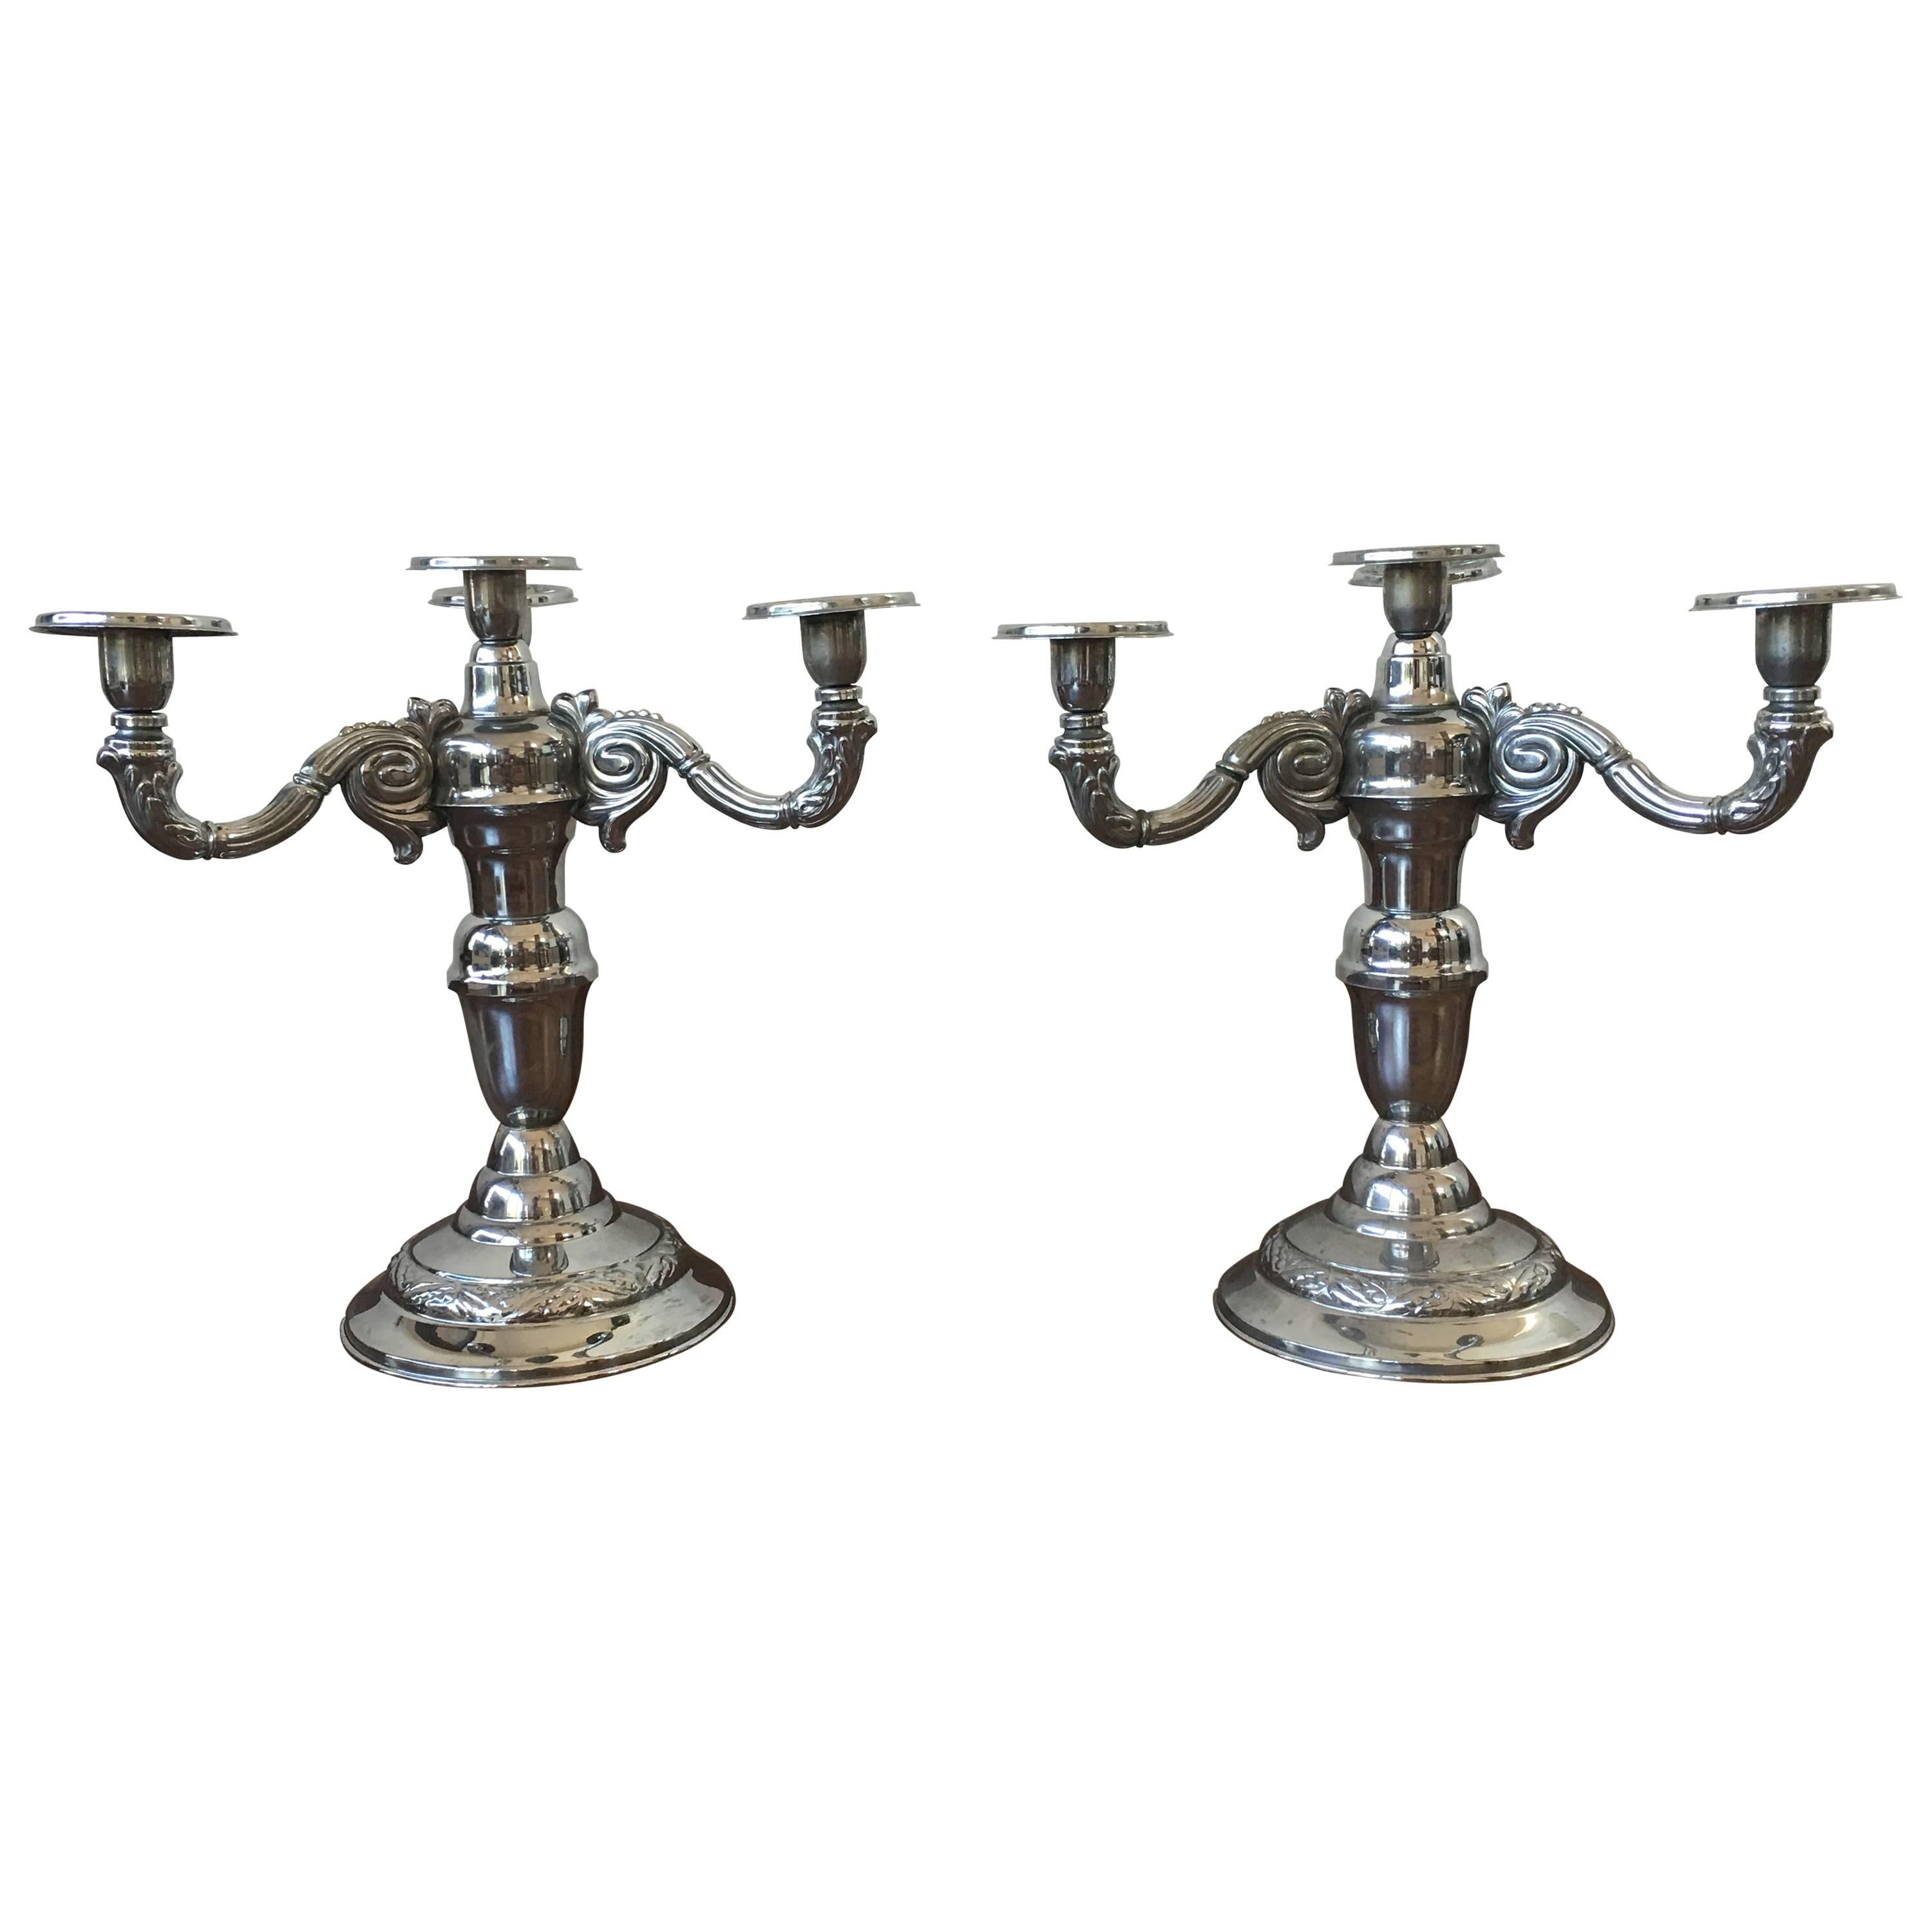 Pair of Four-Armed Art Deco Candlesticks, 1930s-1940s, Sweden